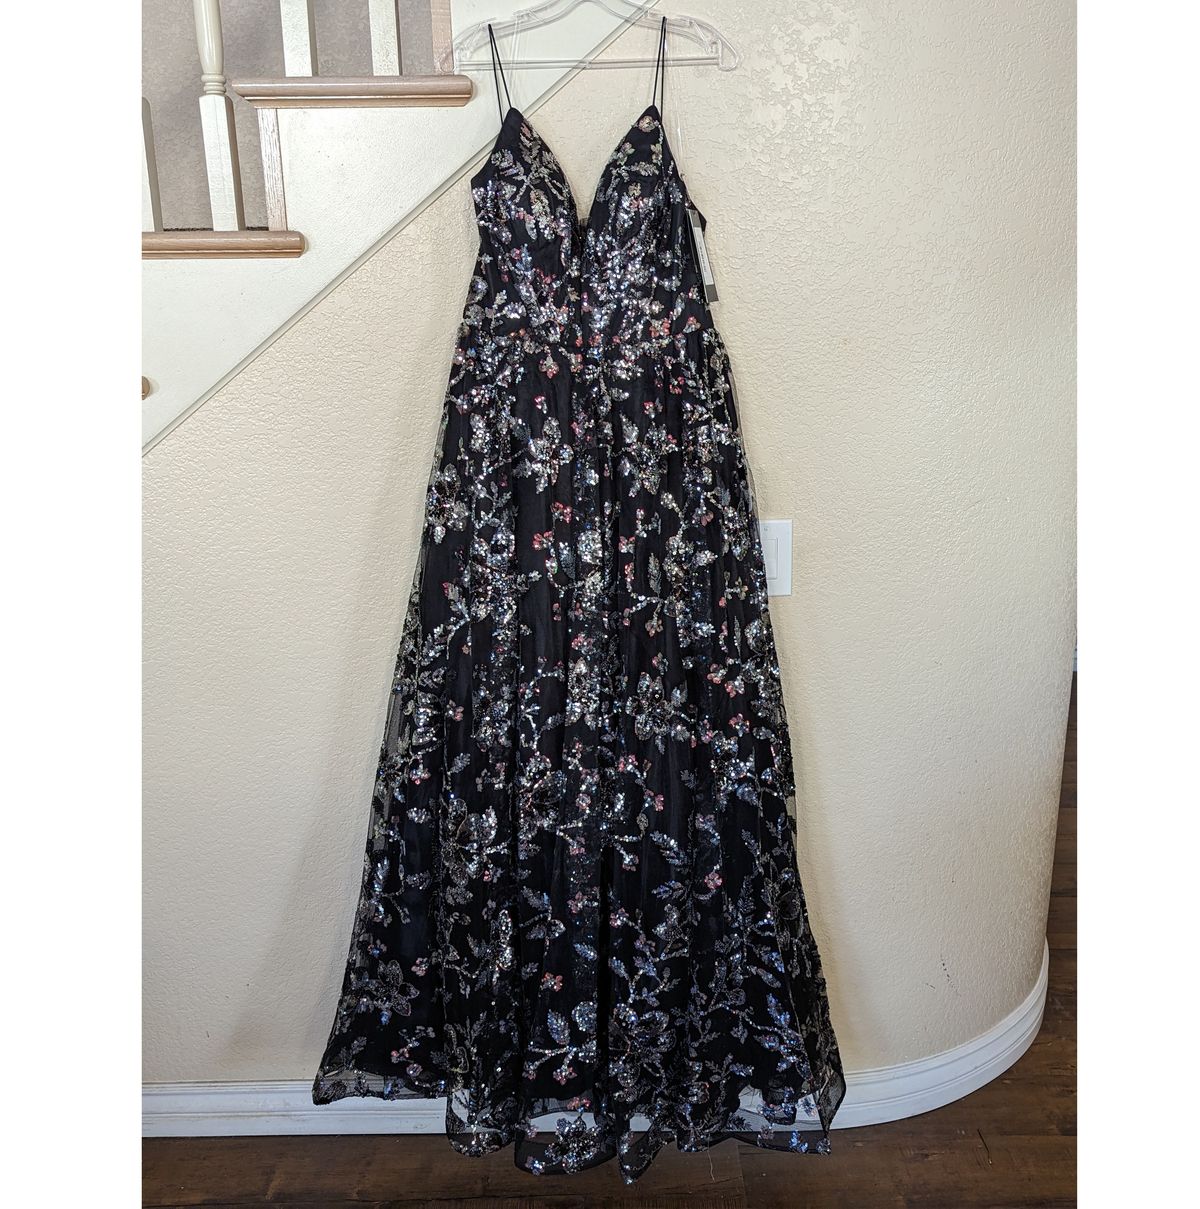 Style Gunmetal & Black Floral Sequined A-line Formal Ball Gown Cinderella Divine Size 14 Plunge Black Ball Gown on Queenly